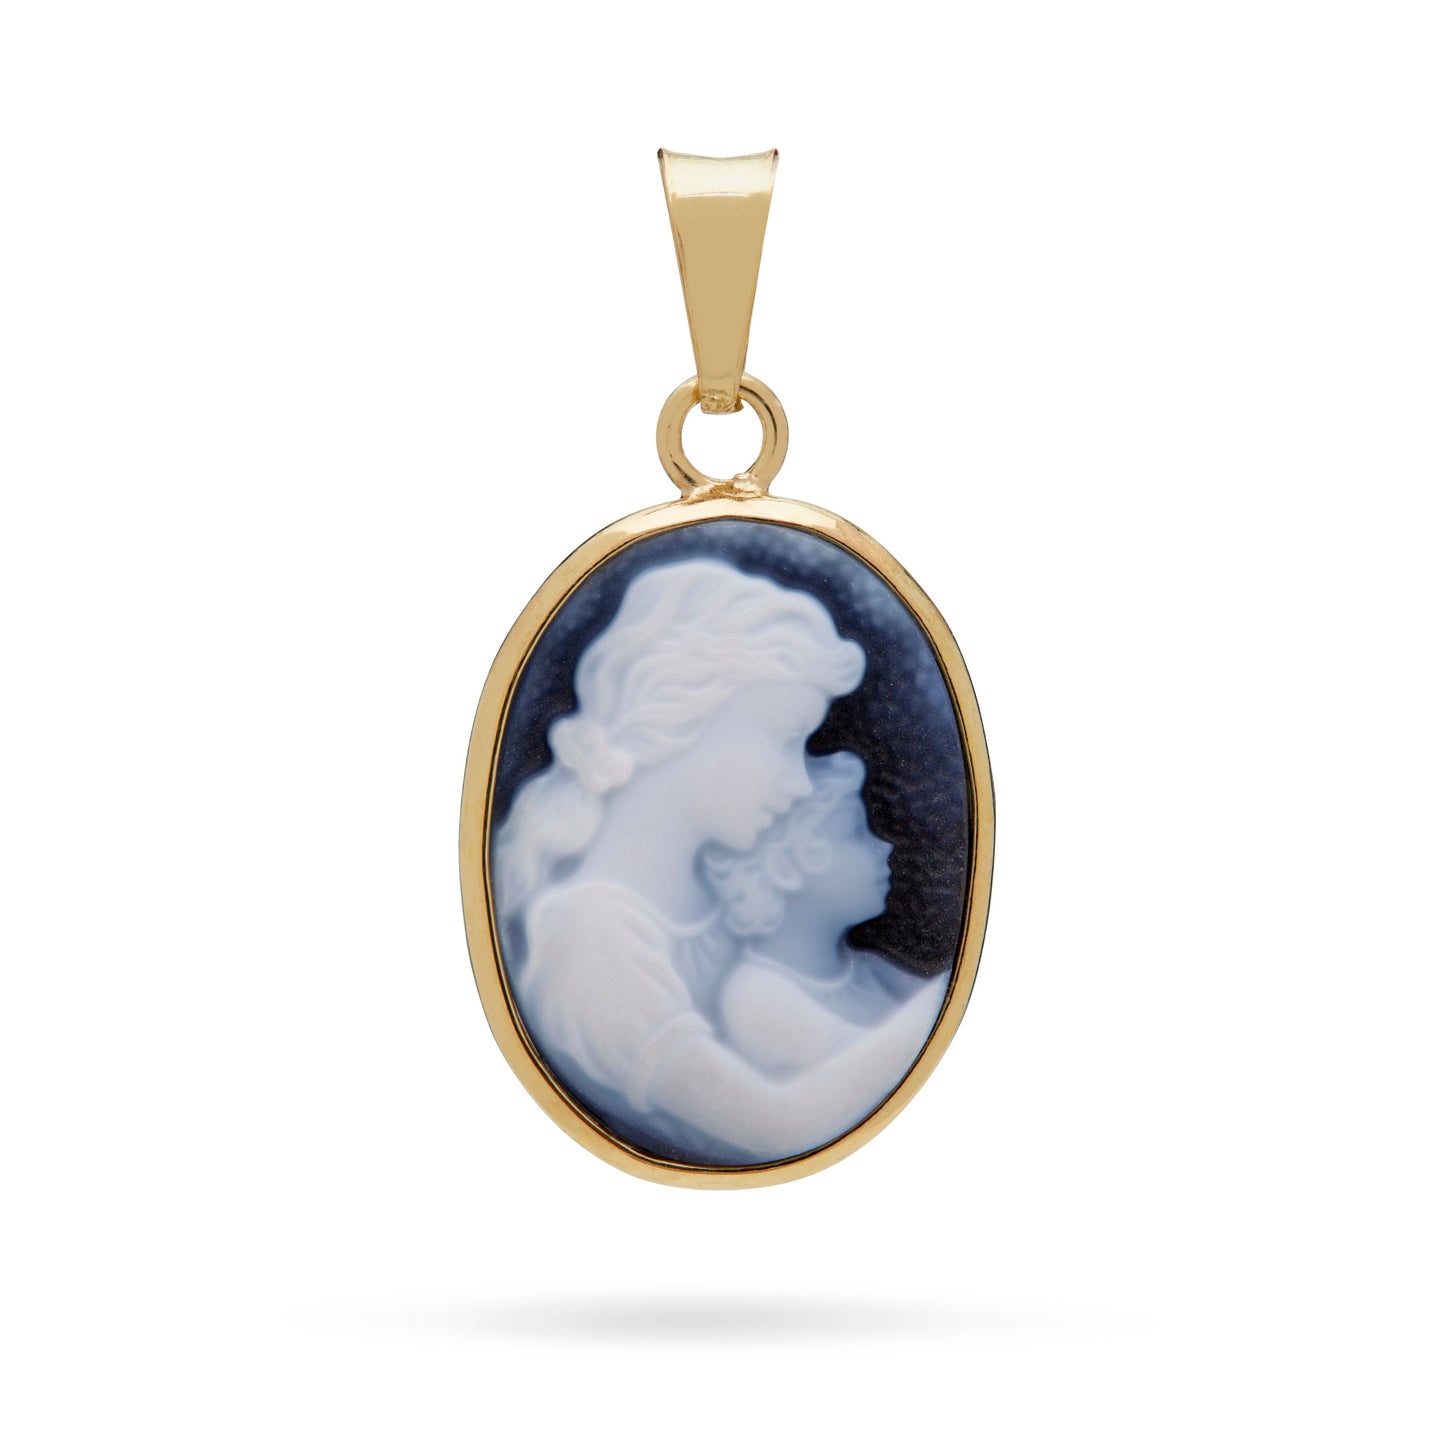 Mondo Cattolico Pendant Oval Yellow Gold Pendant With Black Agate Cameo Portraying Mother Mary With Baby Jesus